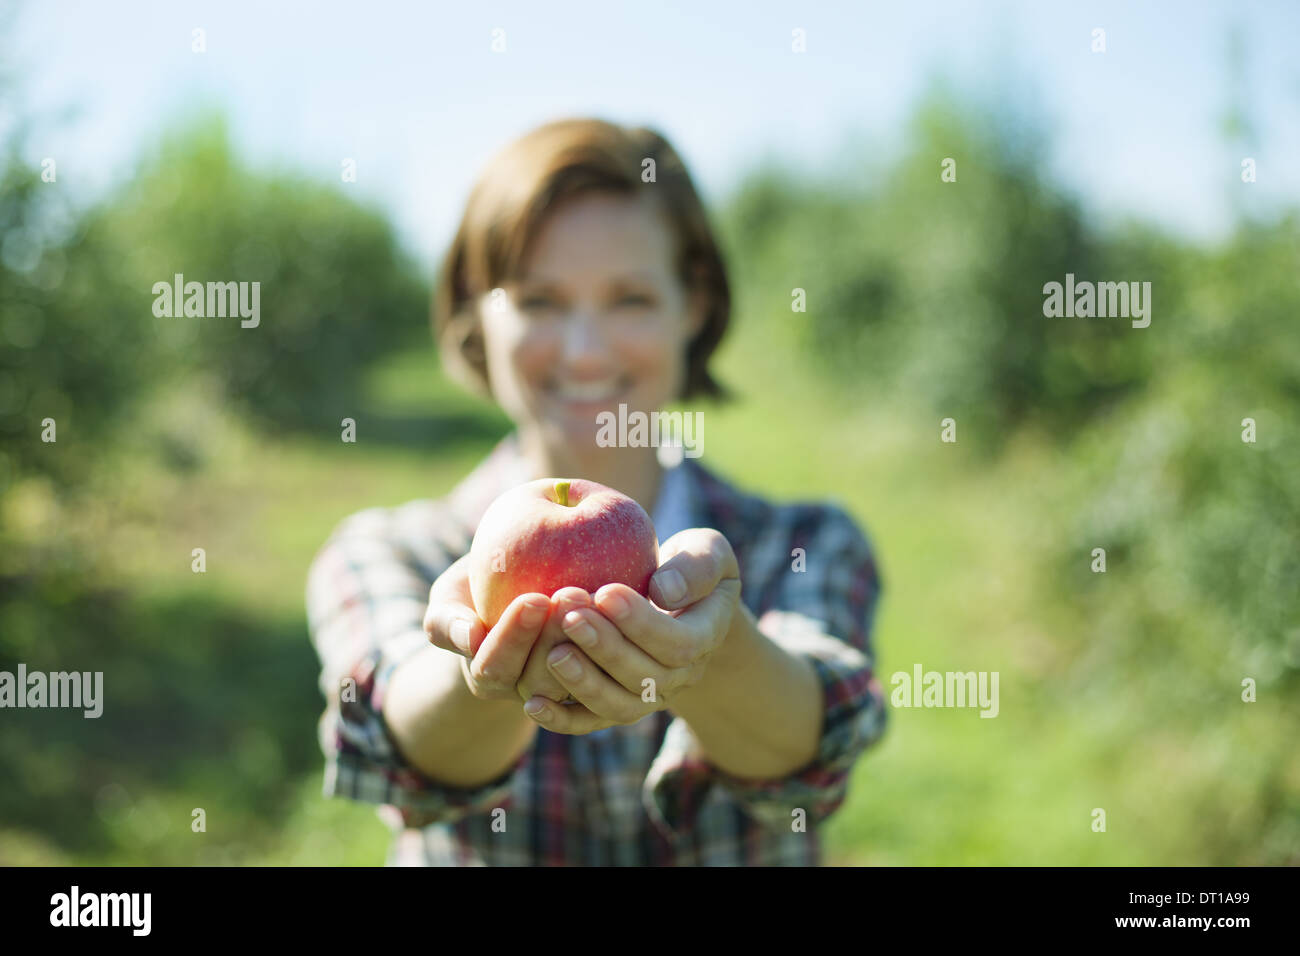 Woodstock New York USA woman in plaid shirt holding apple cupped hands Stock Photo